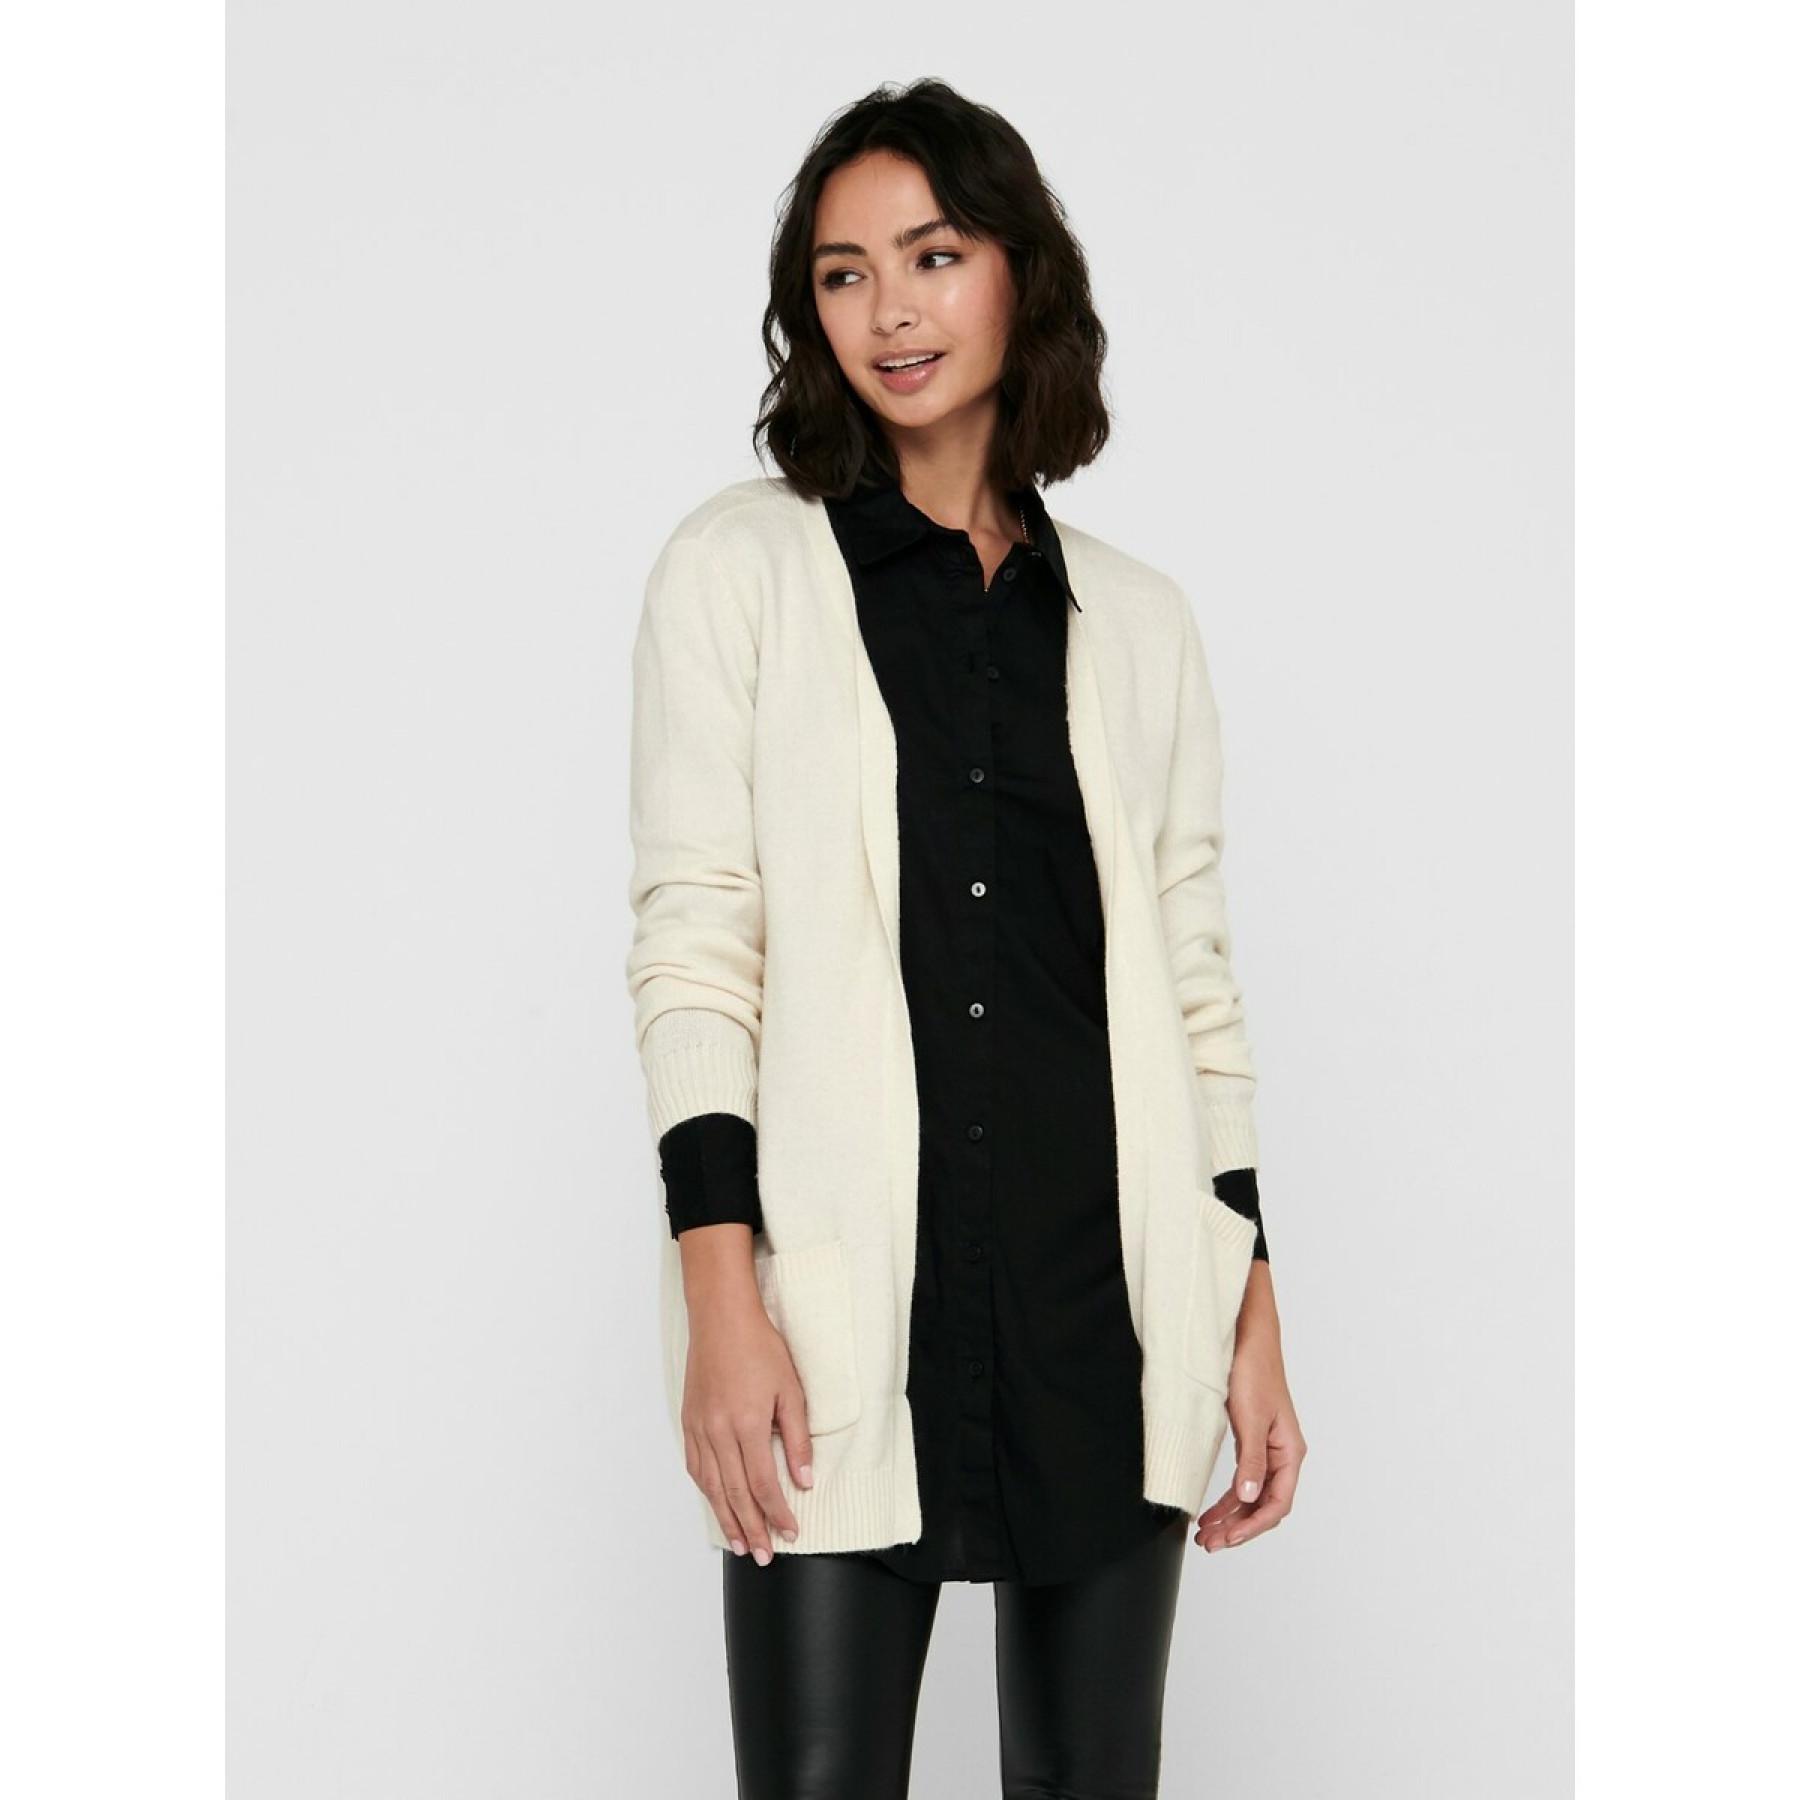 Cardigan femme Only Lesly open